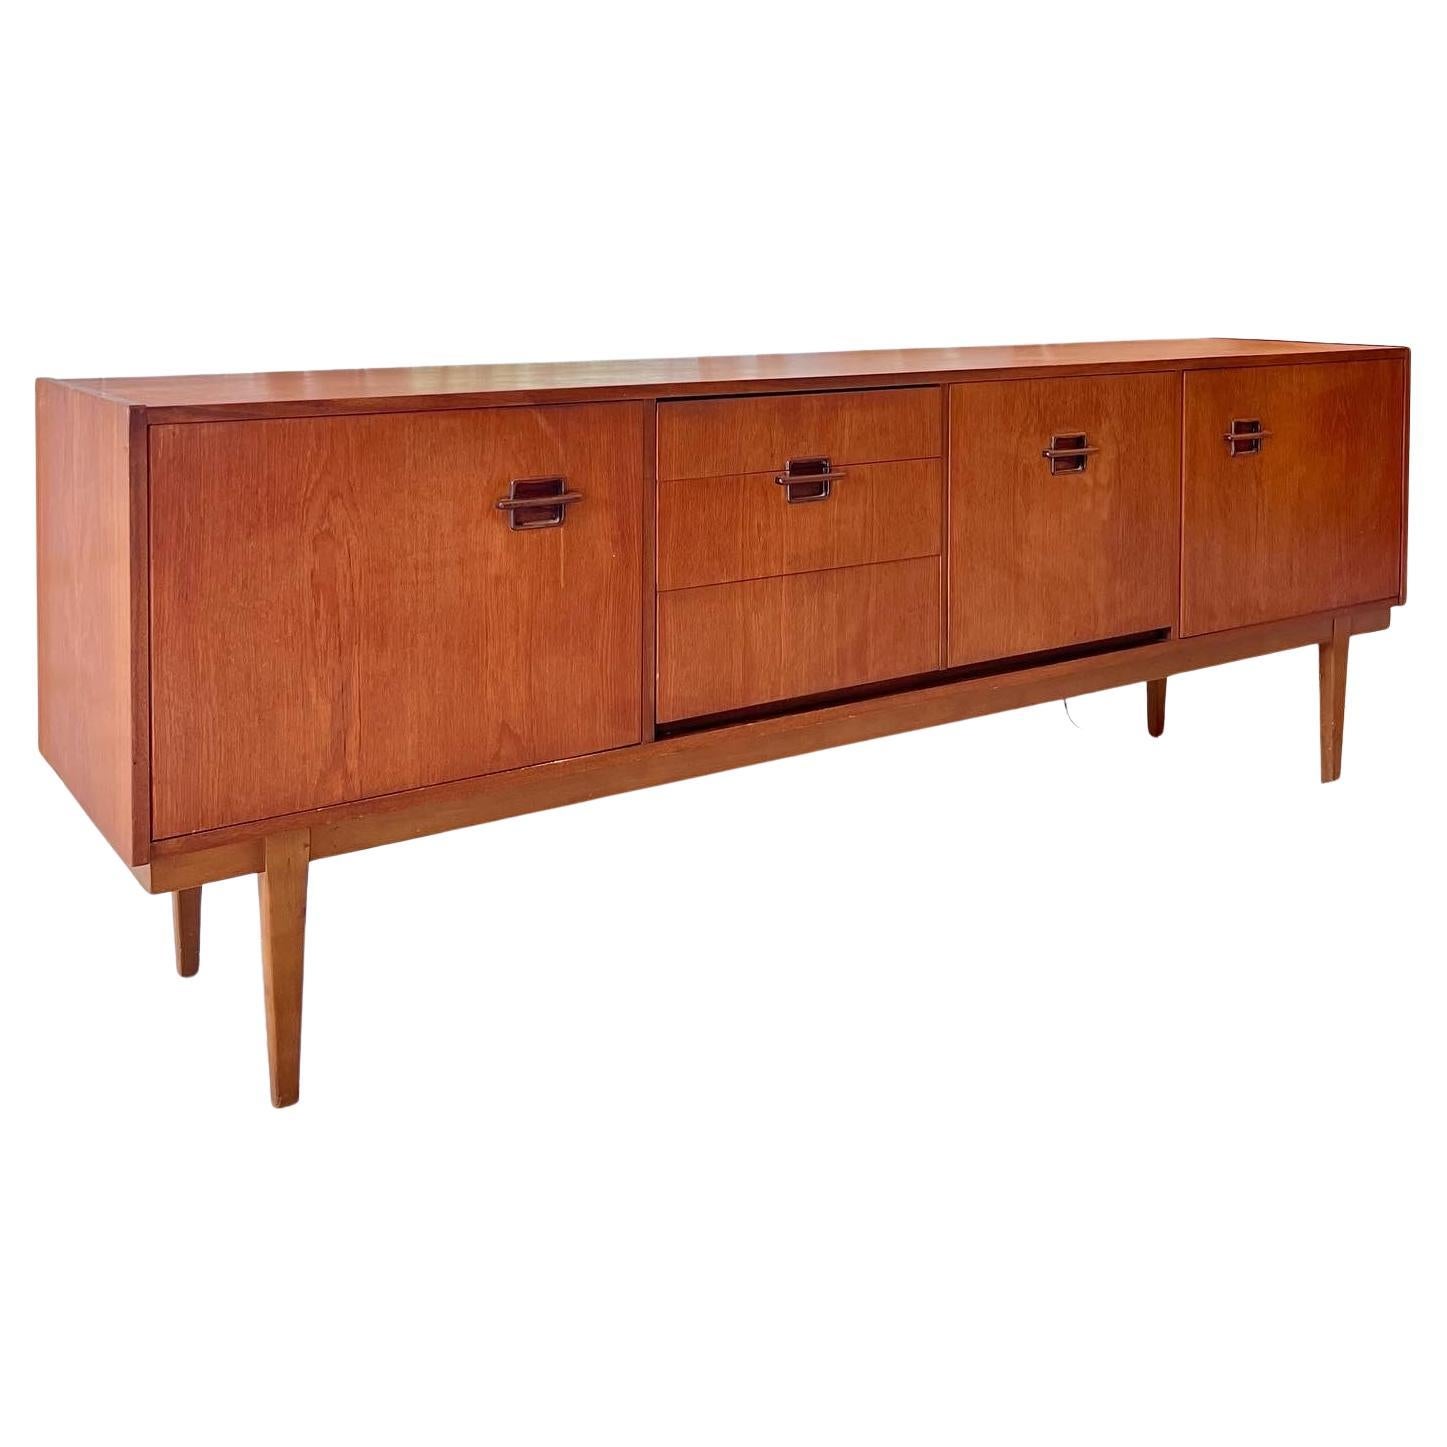 This long and stylish teak sideboard by Nathan furniture offers a wonderful array of storage spaces, including a unique front-drop cabinet. Wonderful handle design complements the classic vintage finish, perfect for any room in the home or office.